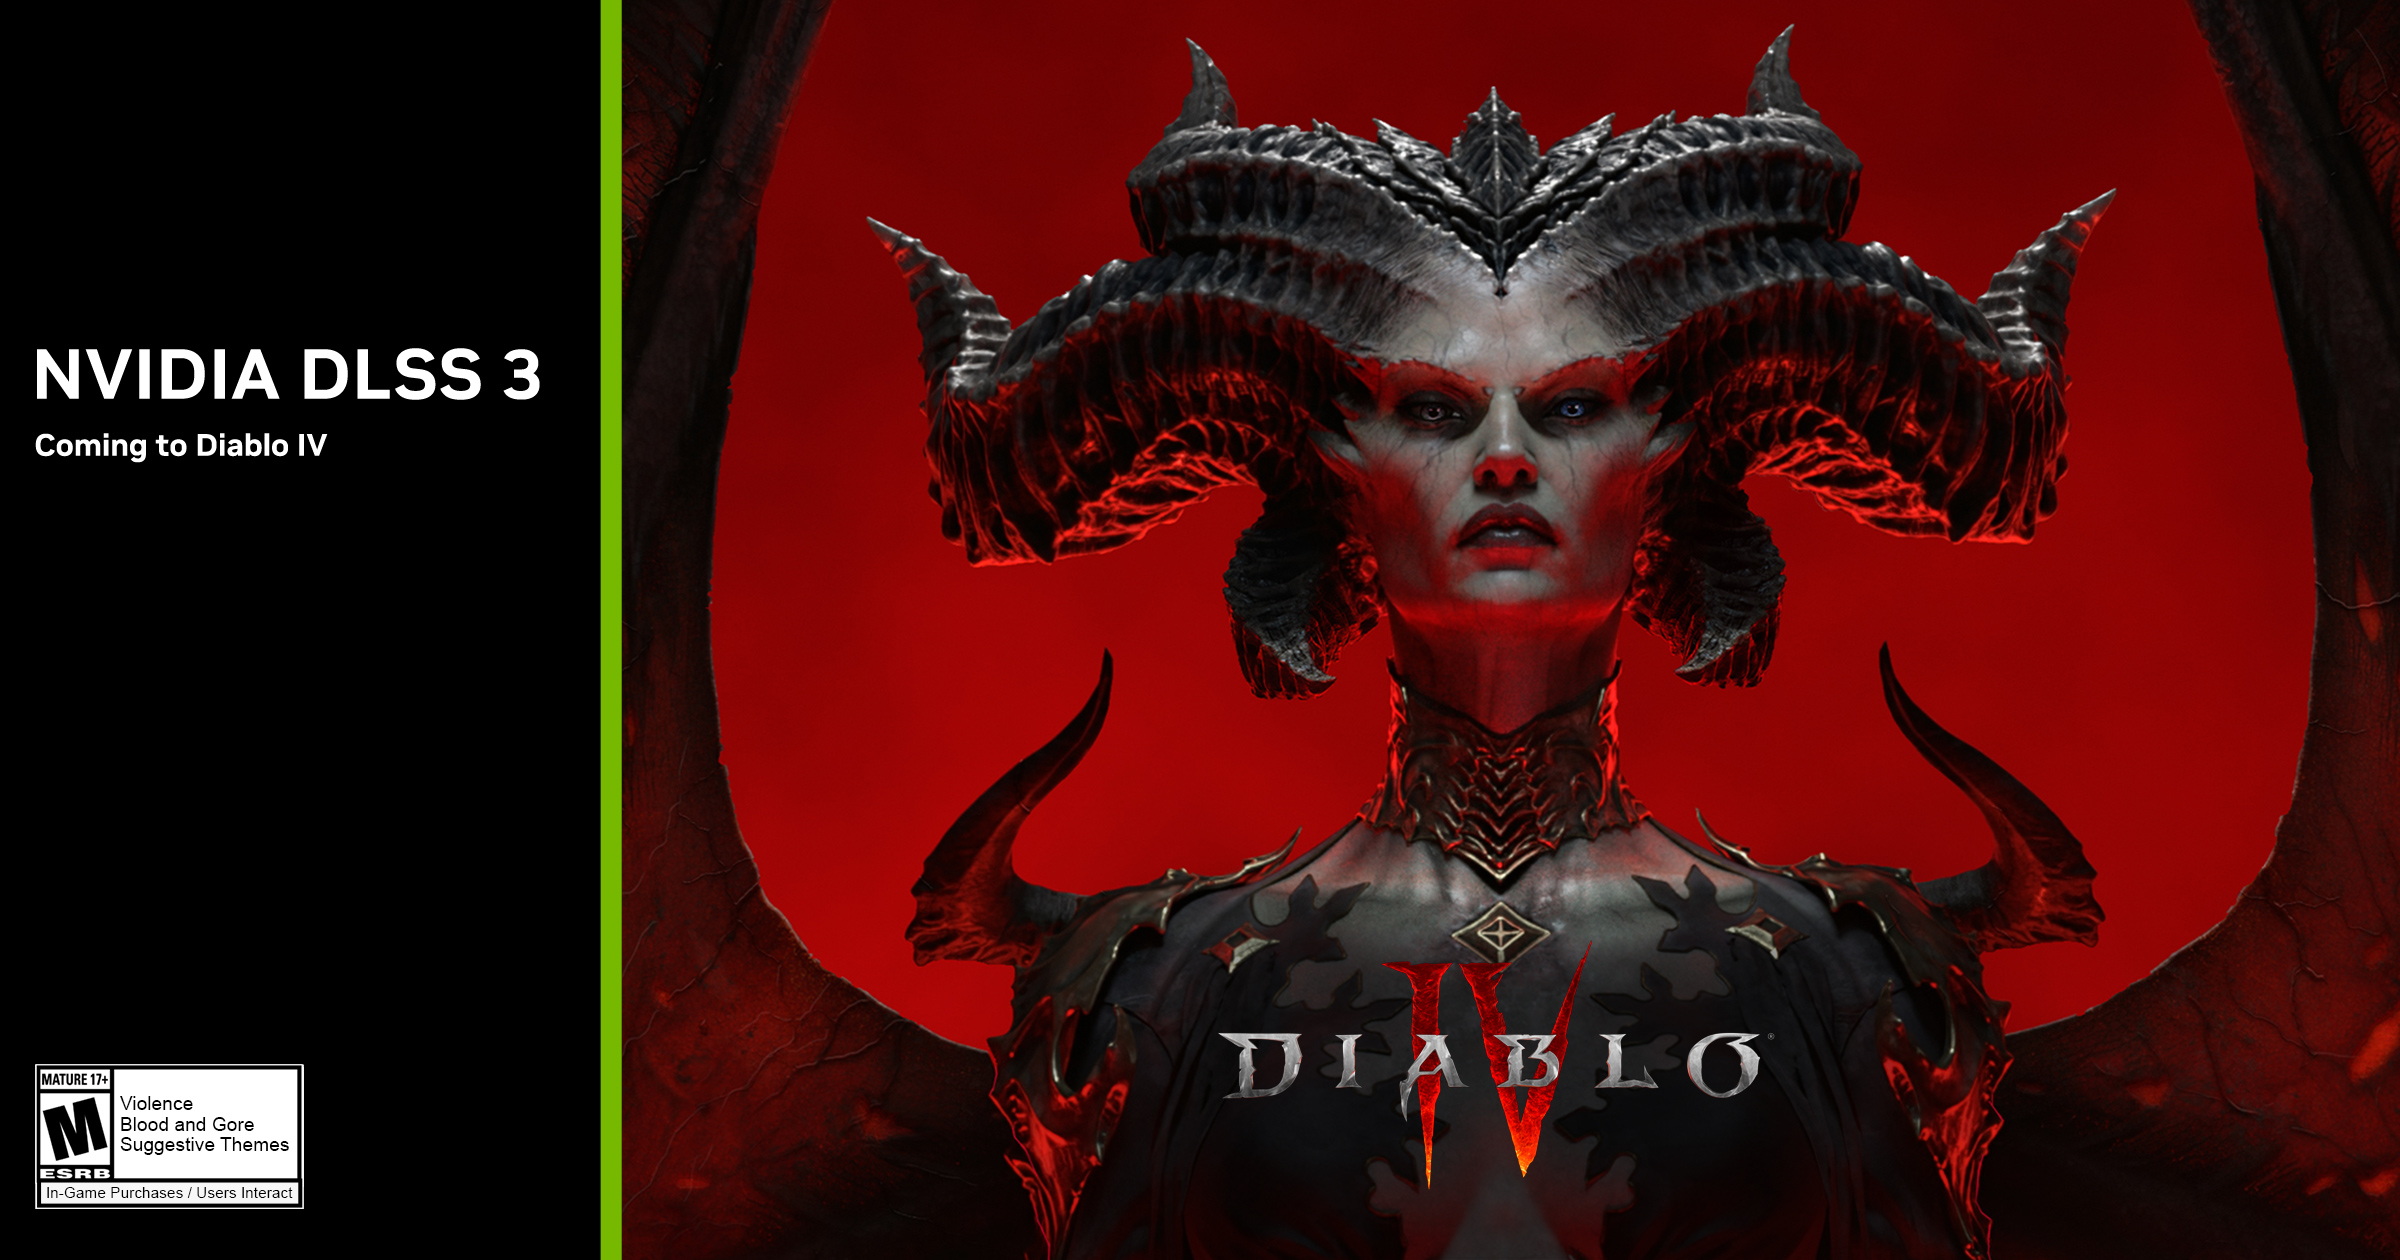 NVIDIA unveils DLSS 3 for Diablo IV and other pre-GDC games and apps